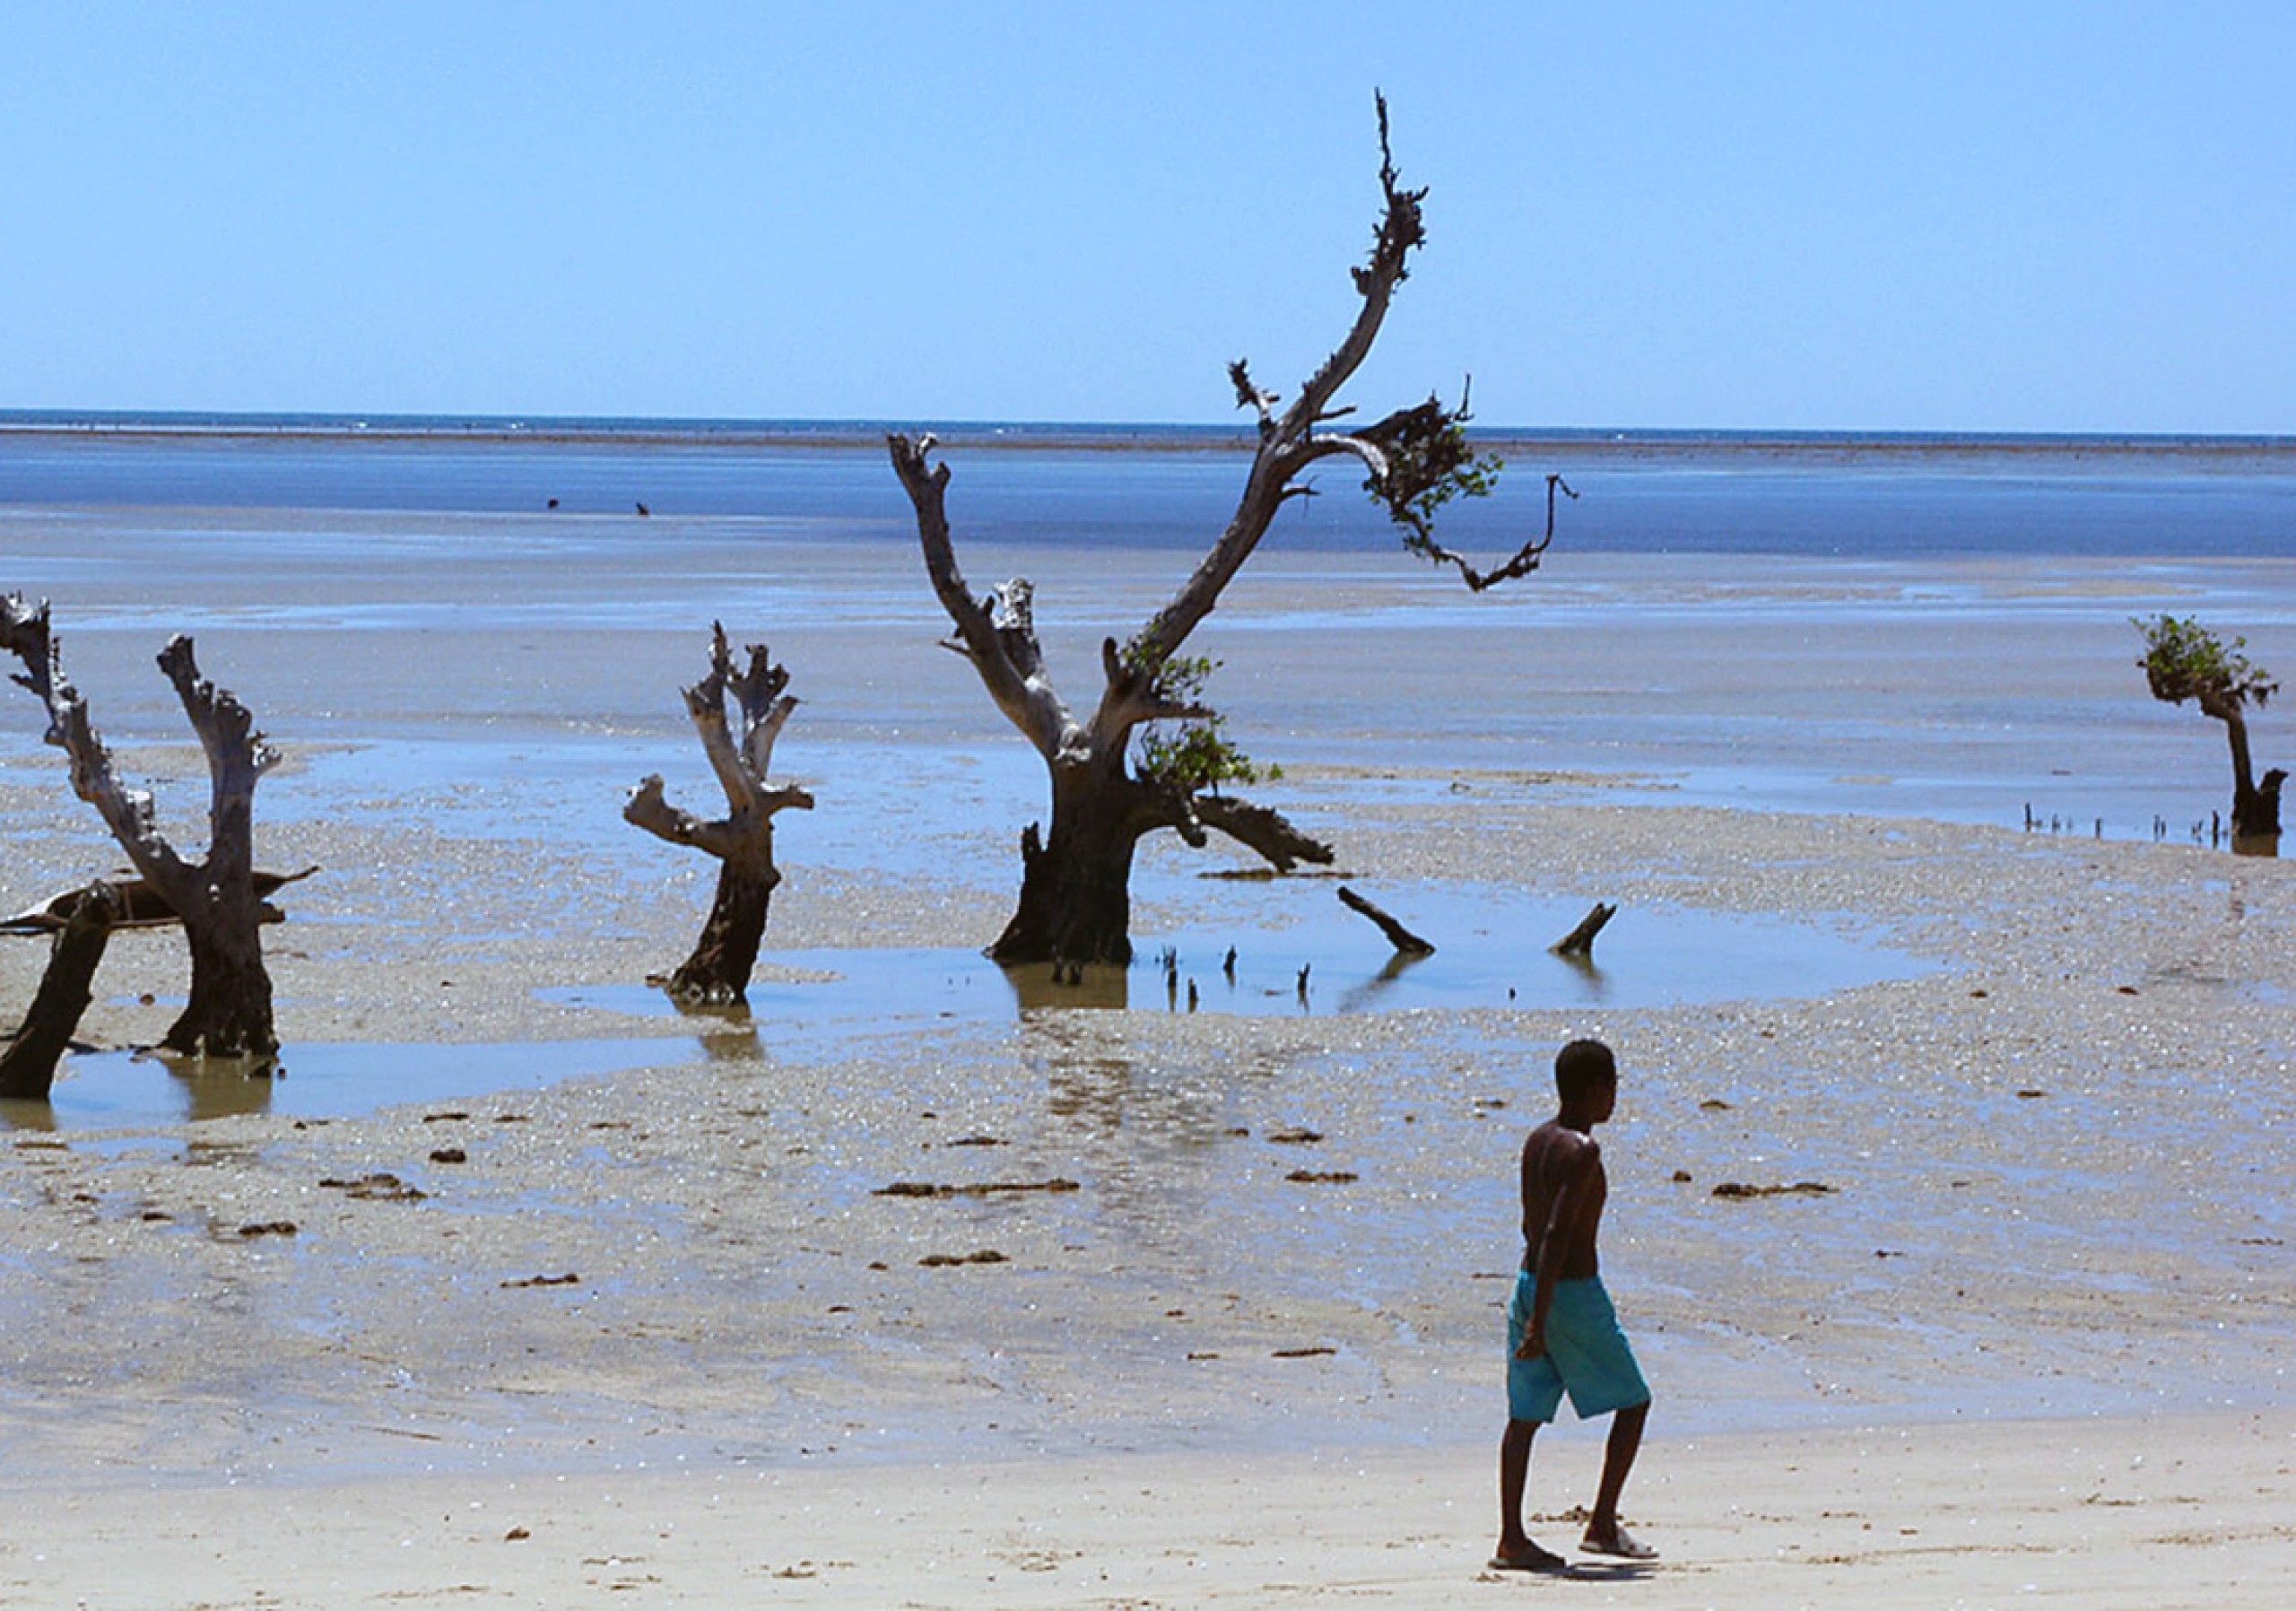 Audemars Piguet worked with ProAct Network to help rehabilitate a section of Madagascar